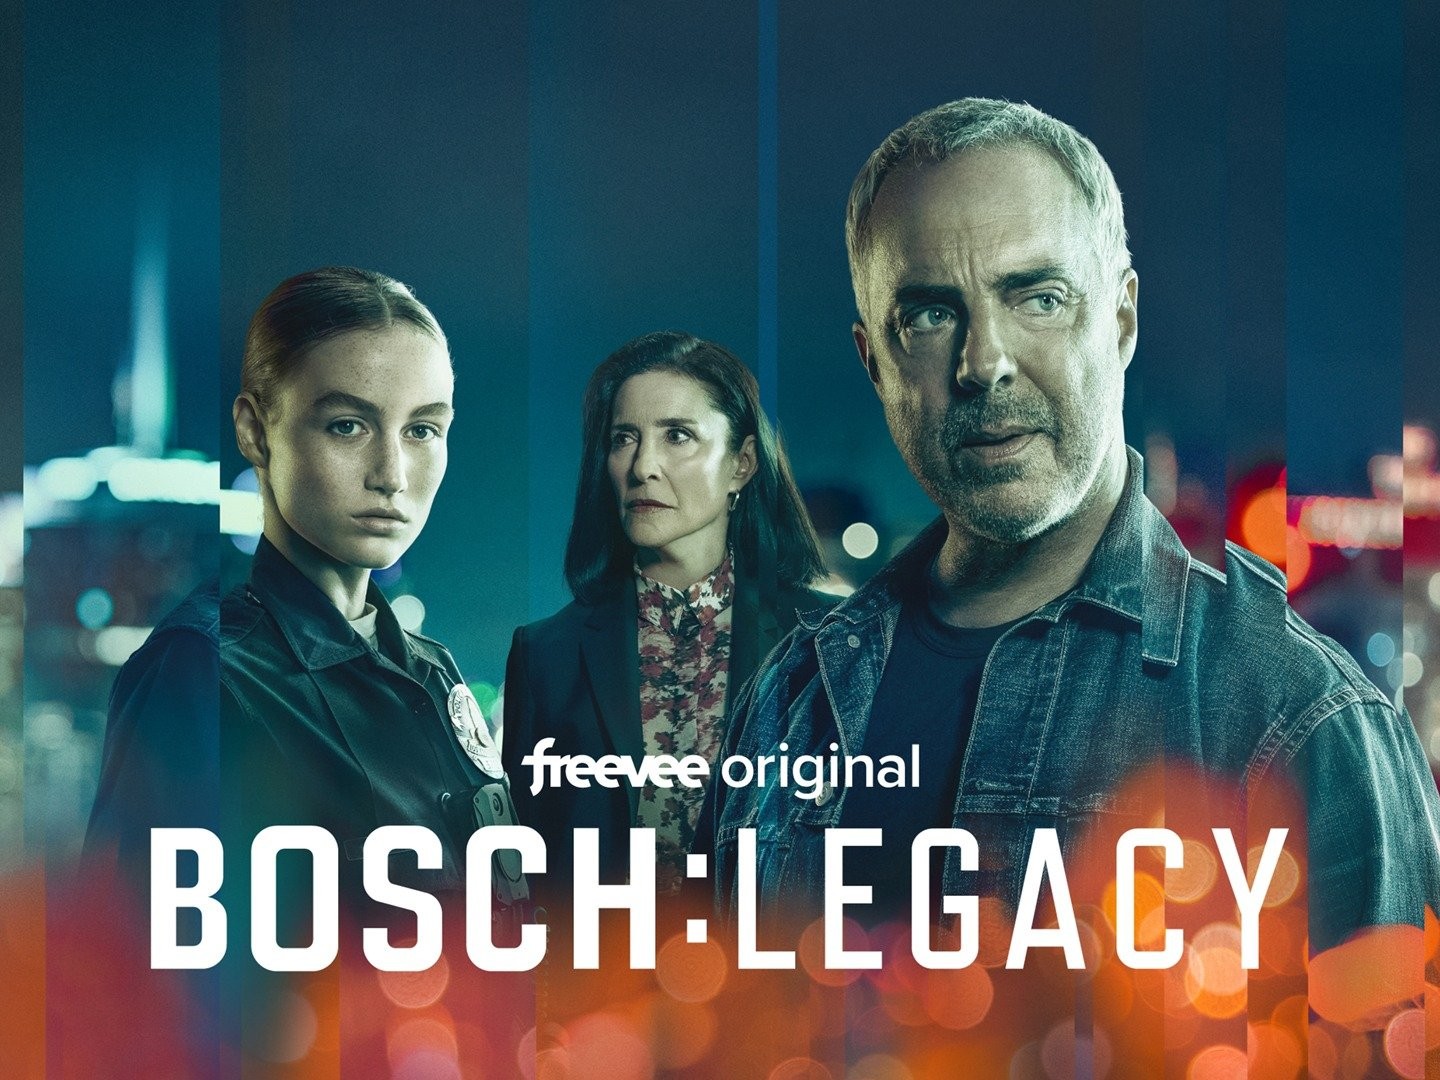 Bosch Legacy: Season 2 is now available on  Freevee